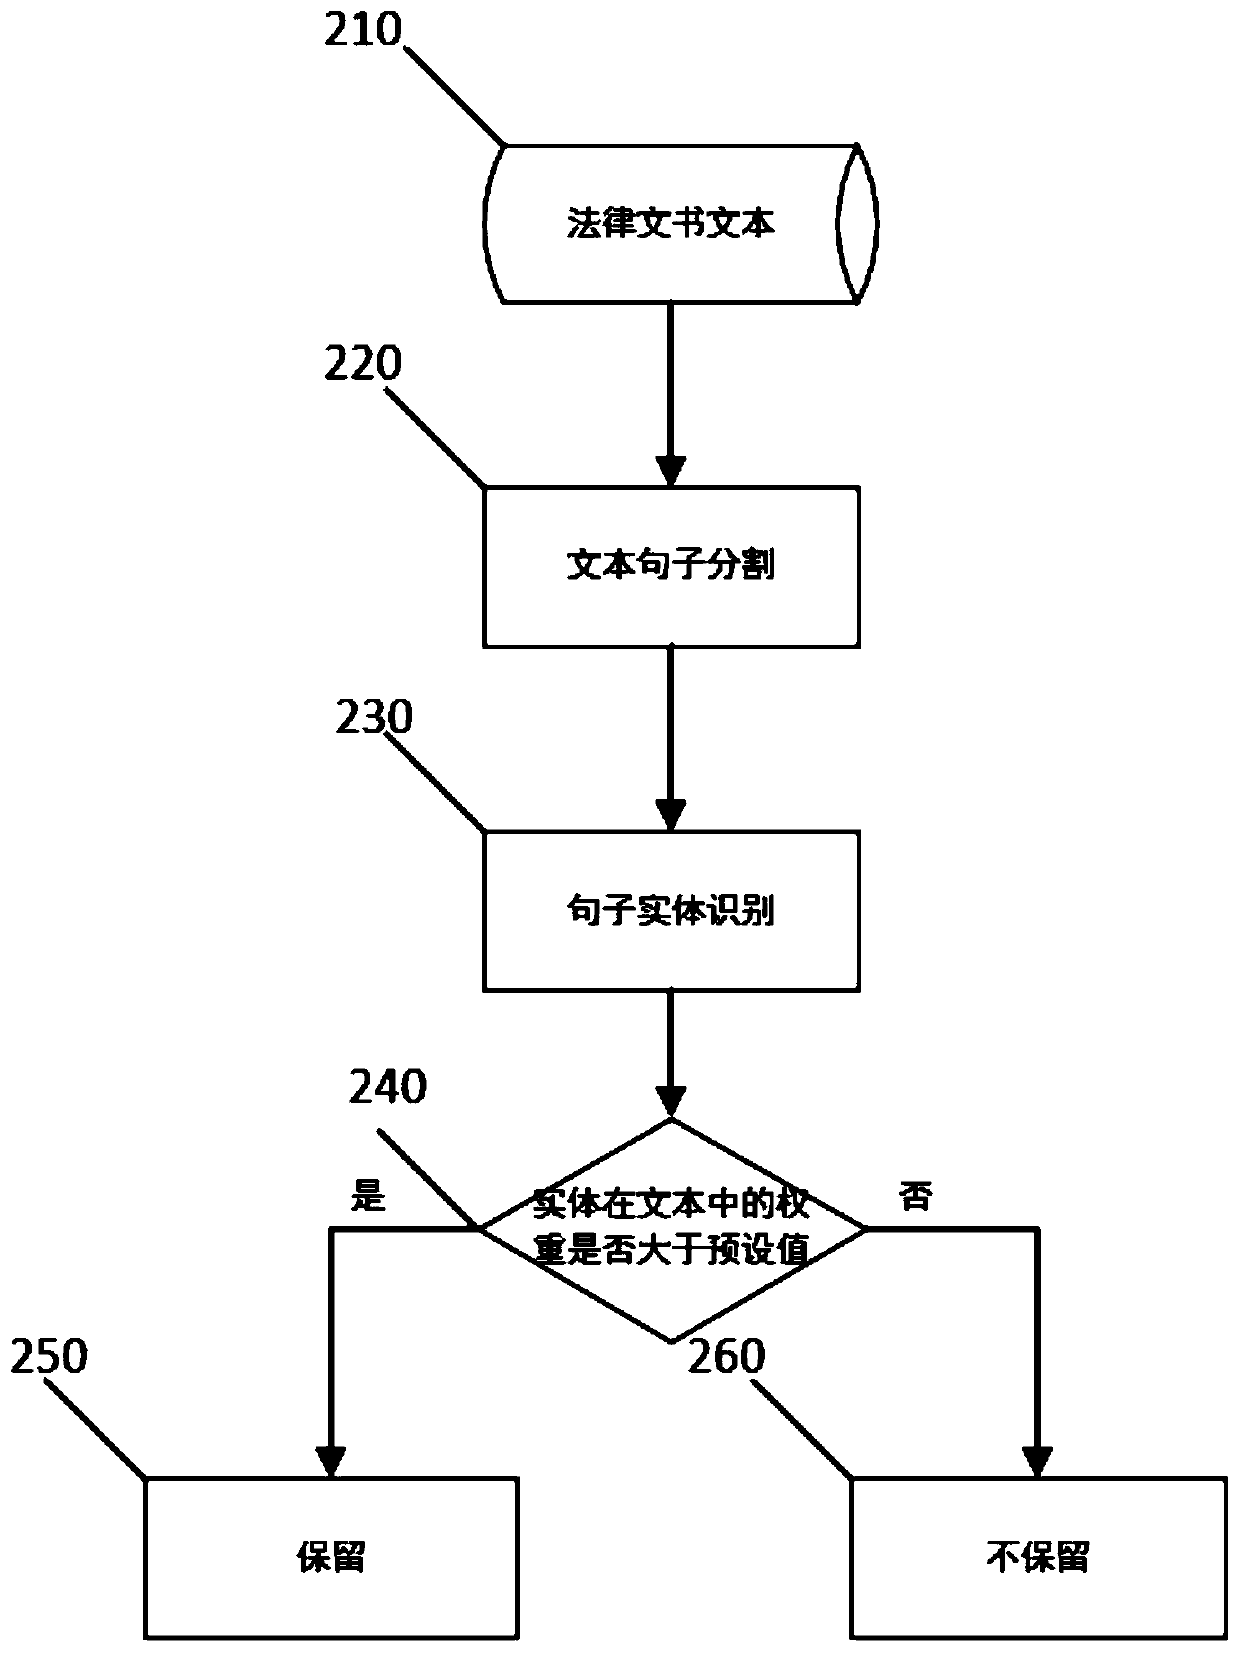 A judicial case event tree construction system and method